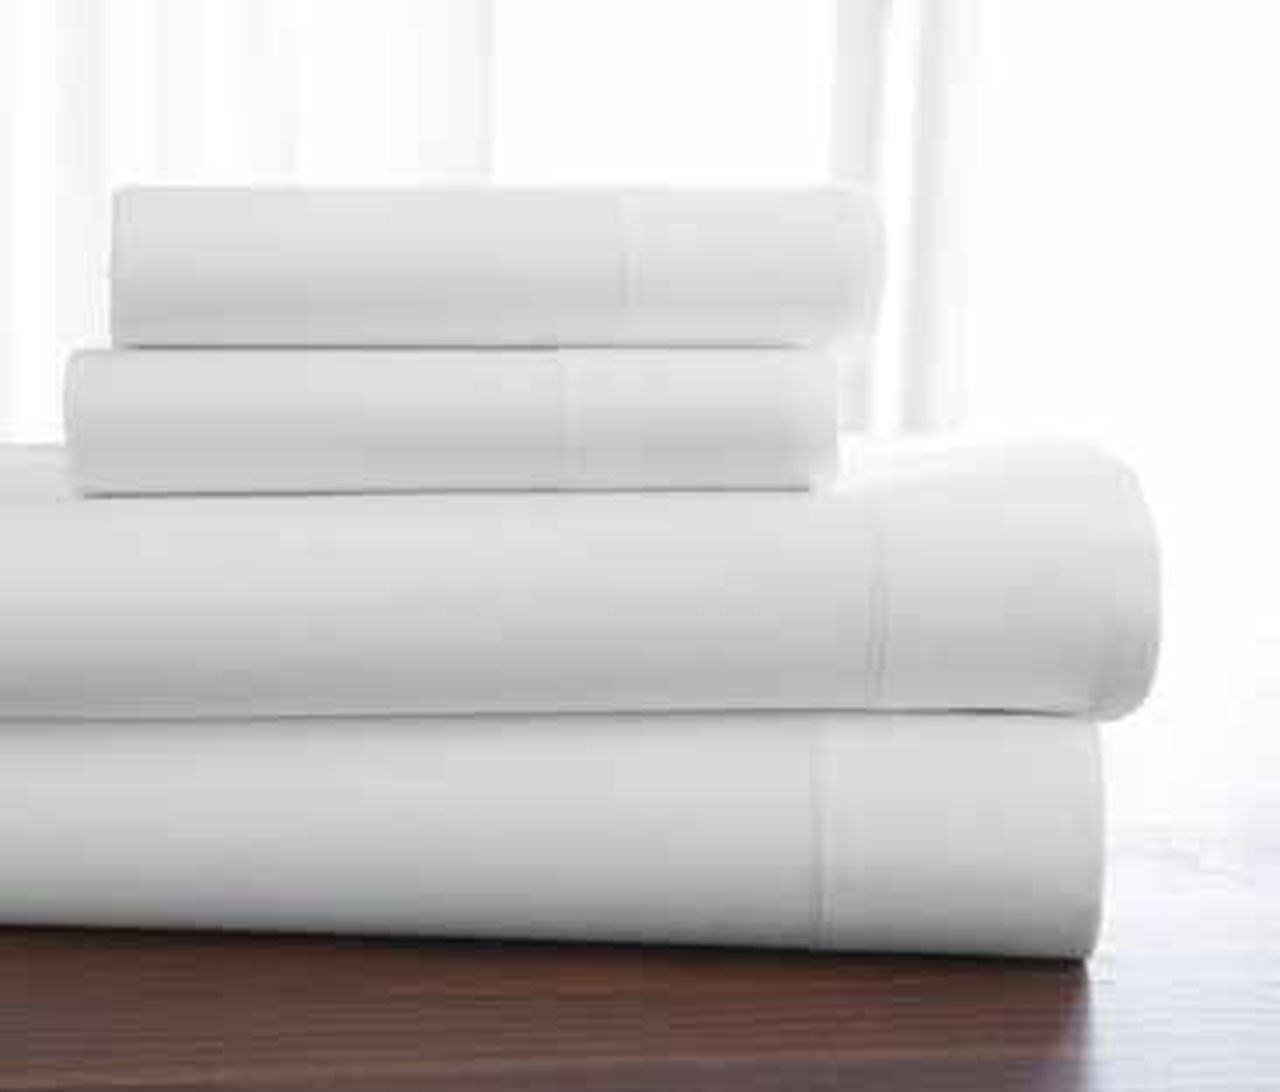 What sets these Welspun T-400 hygrocotton sheets apart?